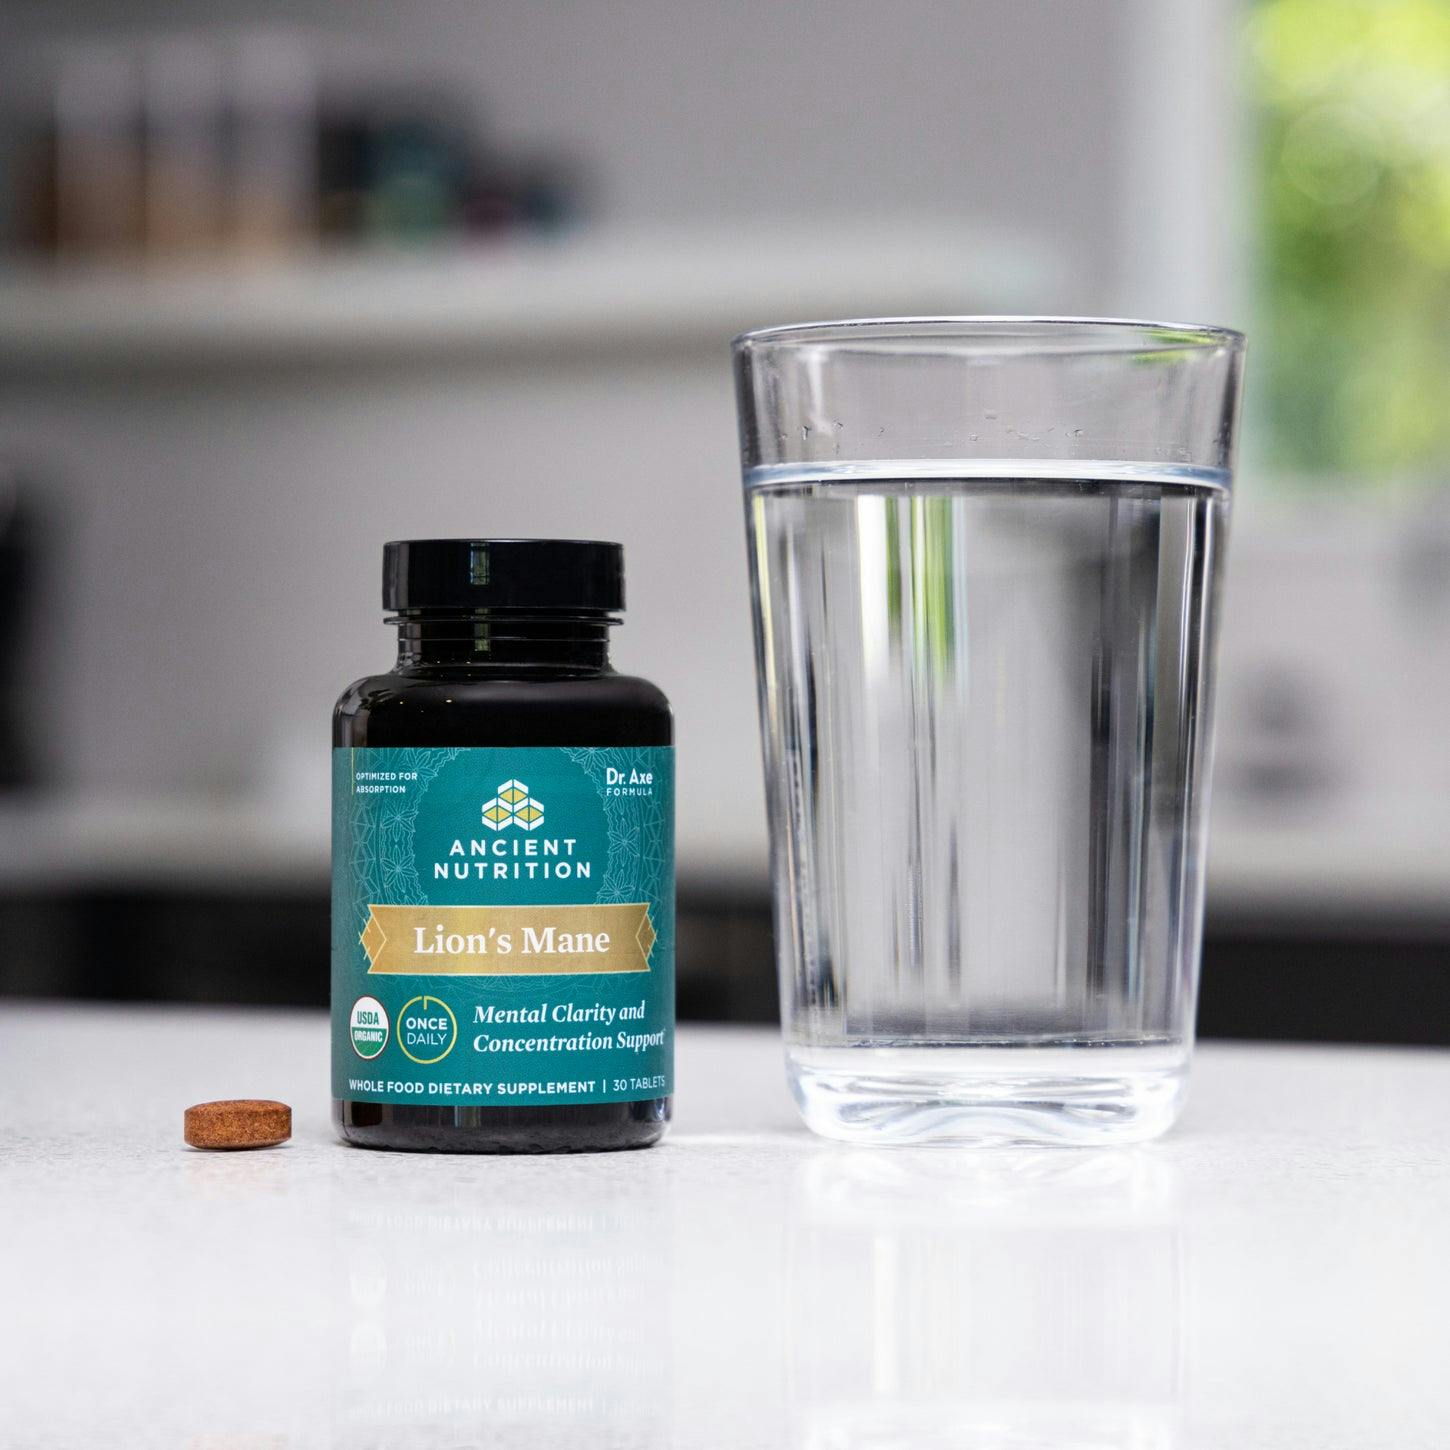 Lion’s Mane Mental Clarity and Concentration Tablets next to a glass of water